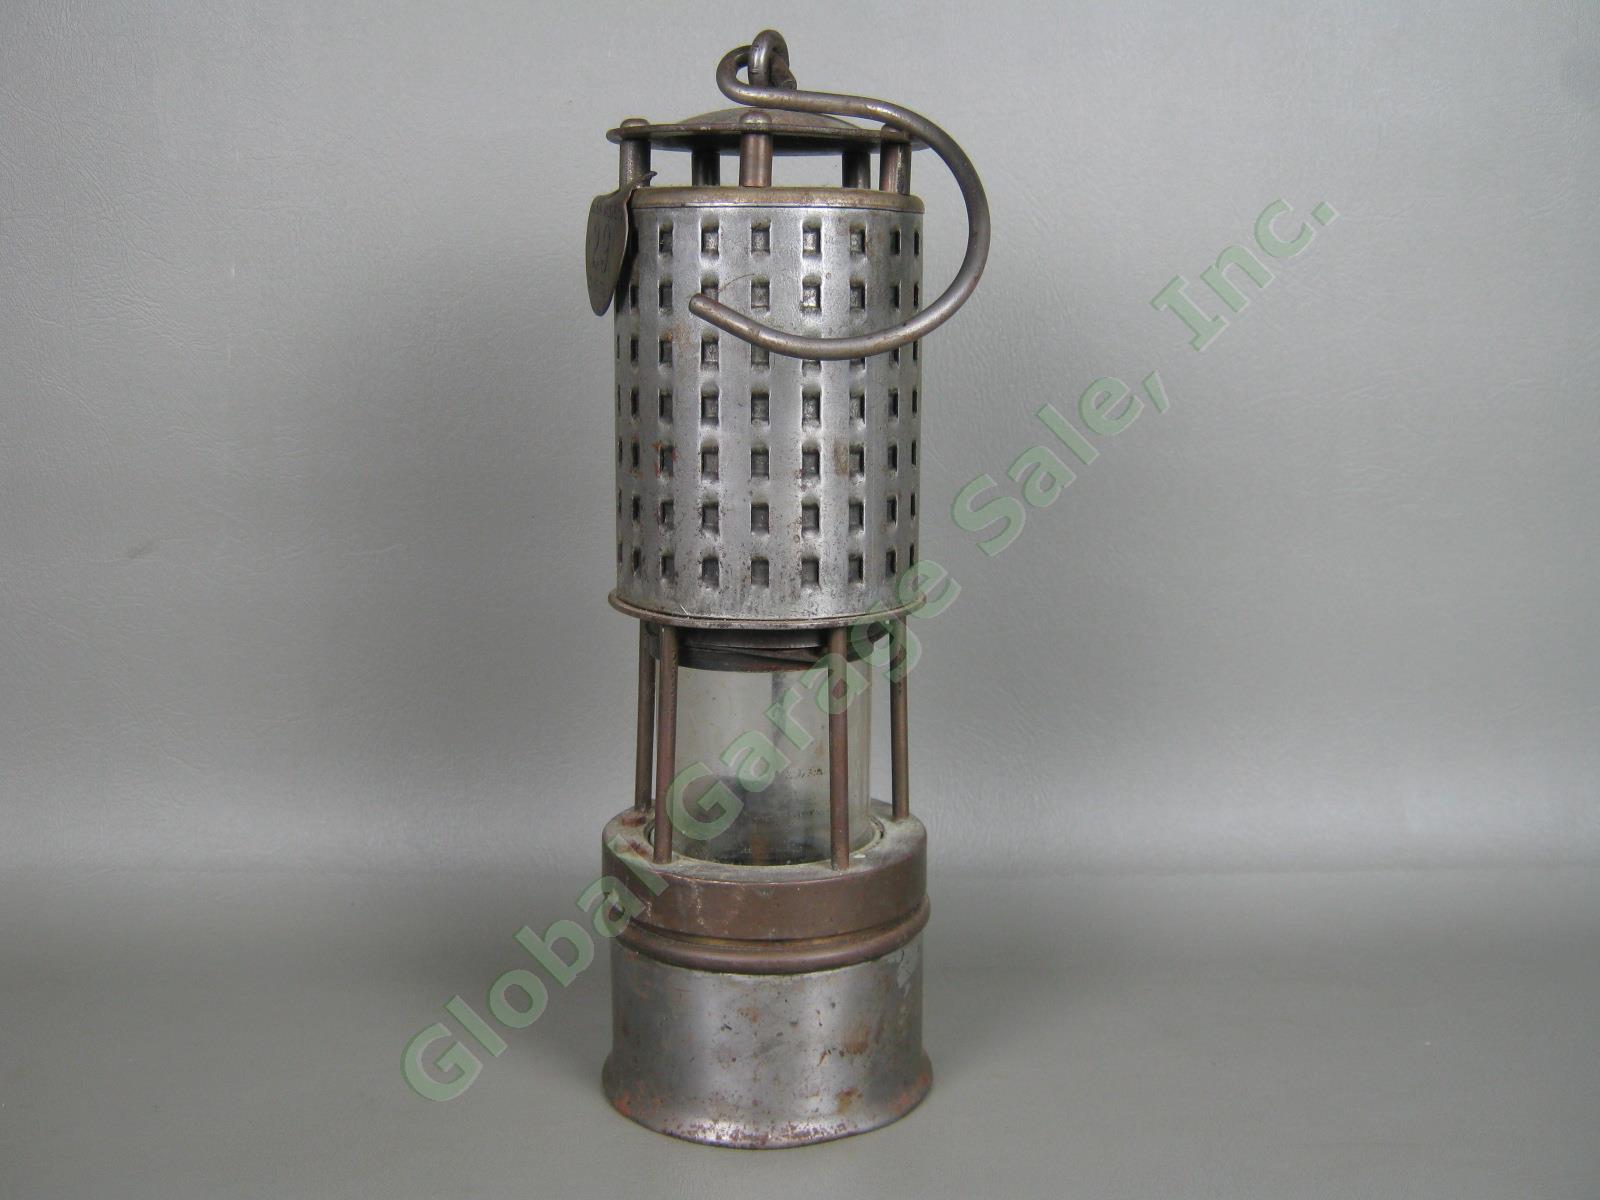 Vtg Permissible 201 Miners Safety Lamp Glen Alden Coal Co 29 No 19 Colly Tag NR! 6